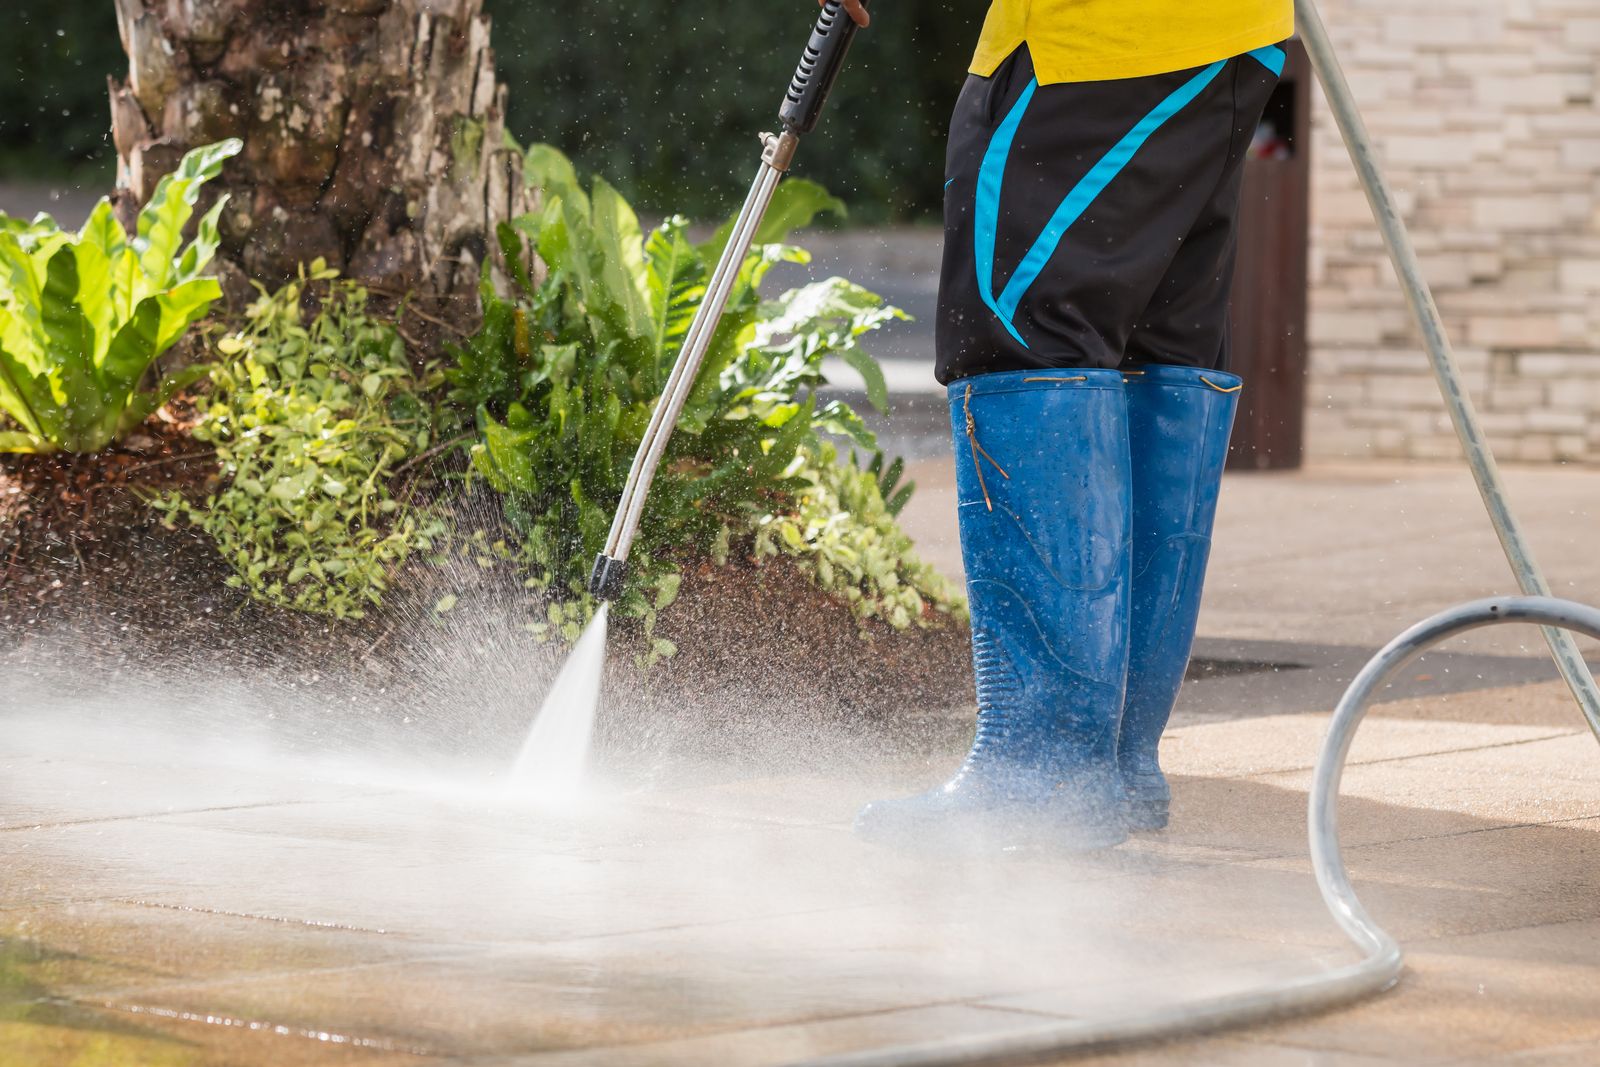 Difference between Pressure Washing and Power Washing